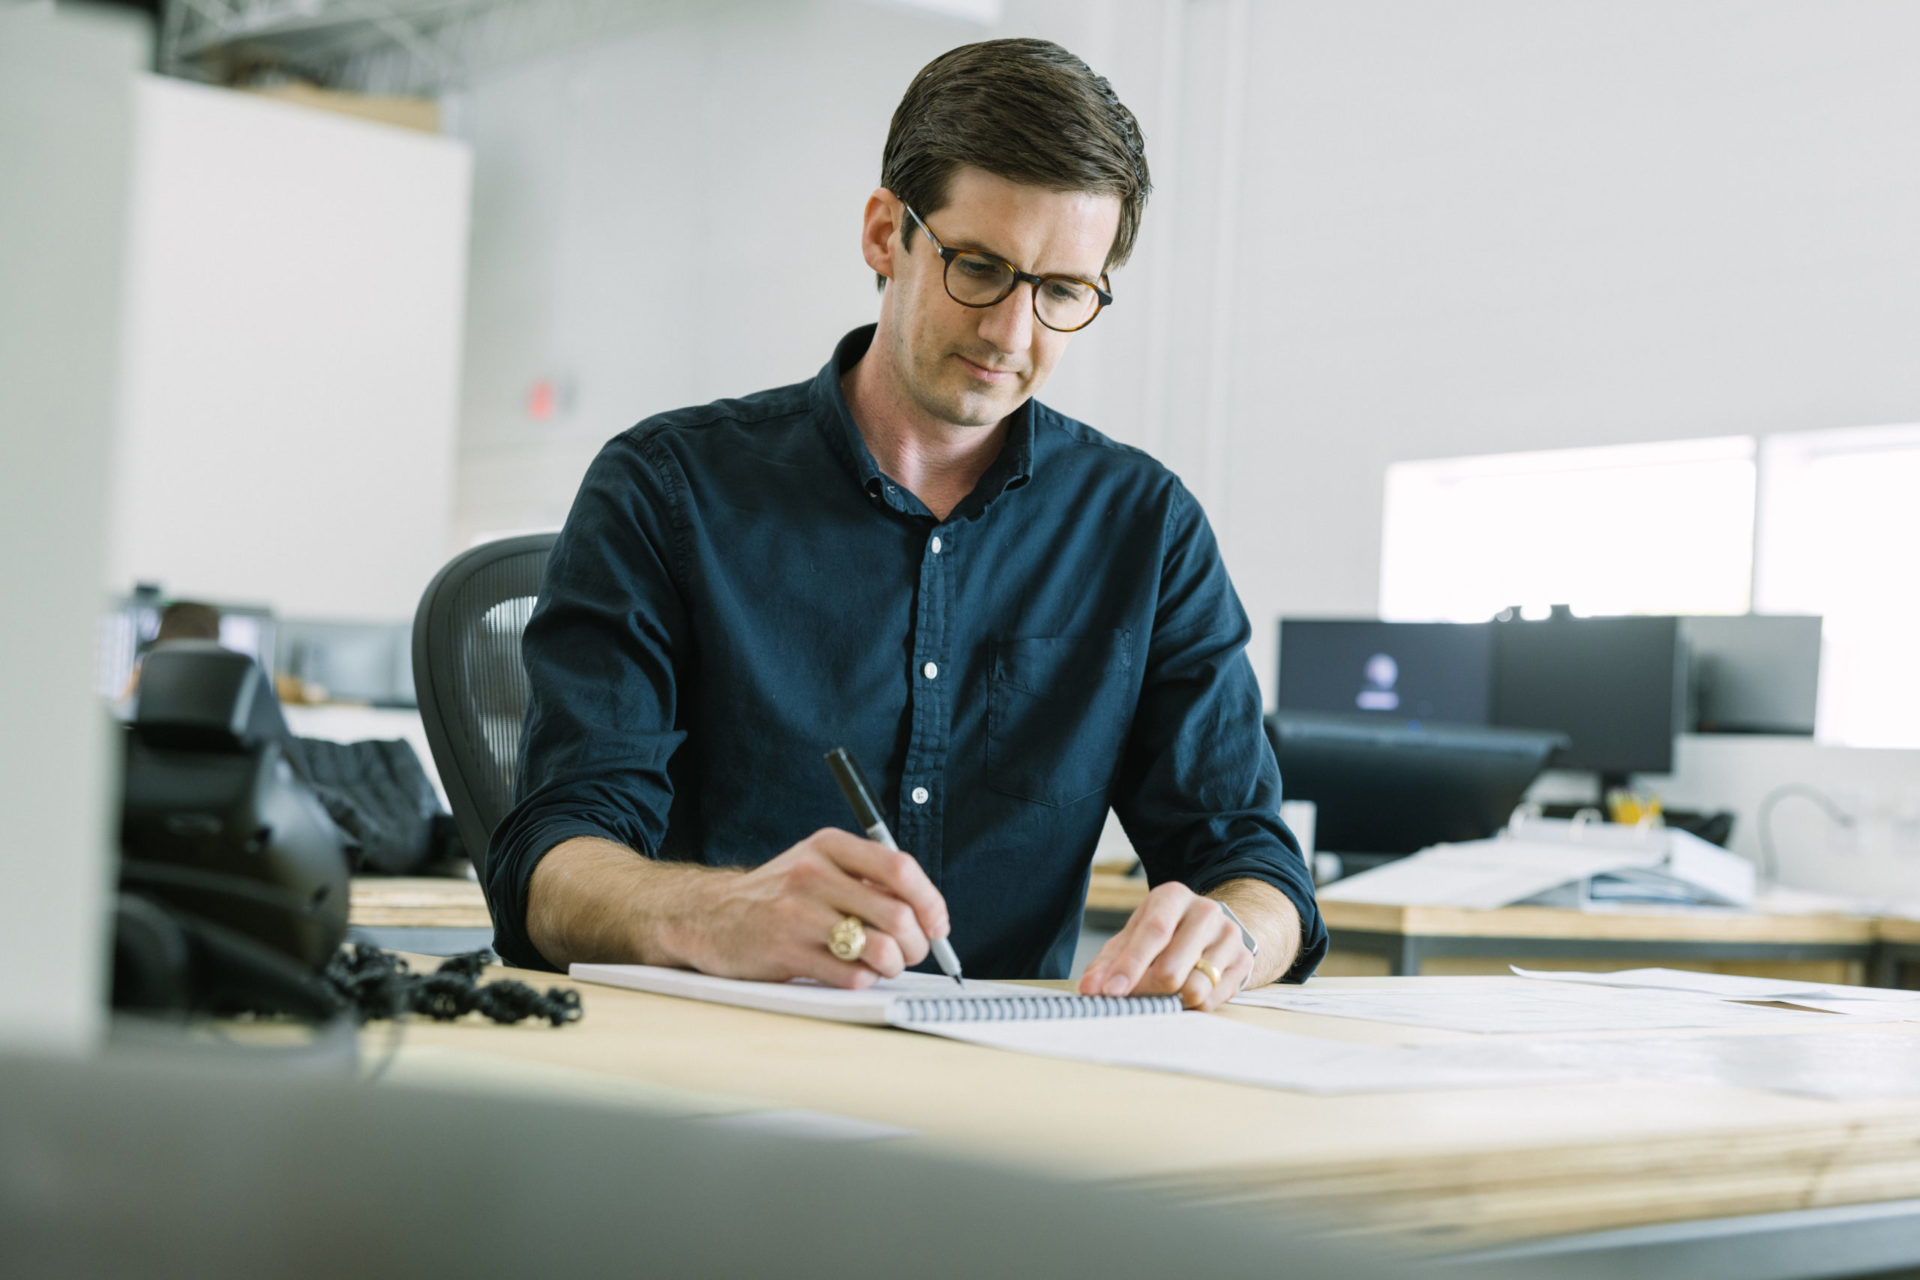 A male architect with dark hair wearing round glasses and a deep navy button-up shirt and rolled up sleeves working at a desk in a modern office